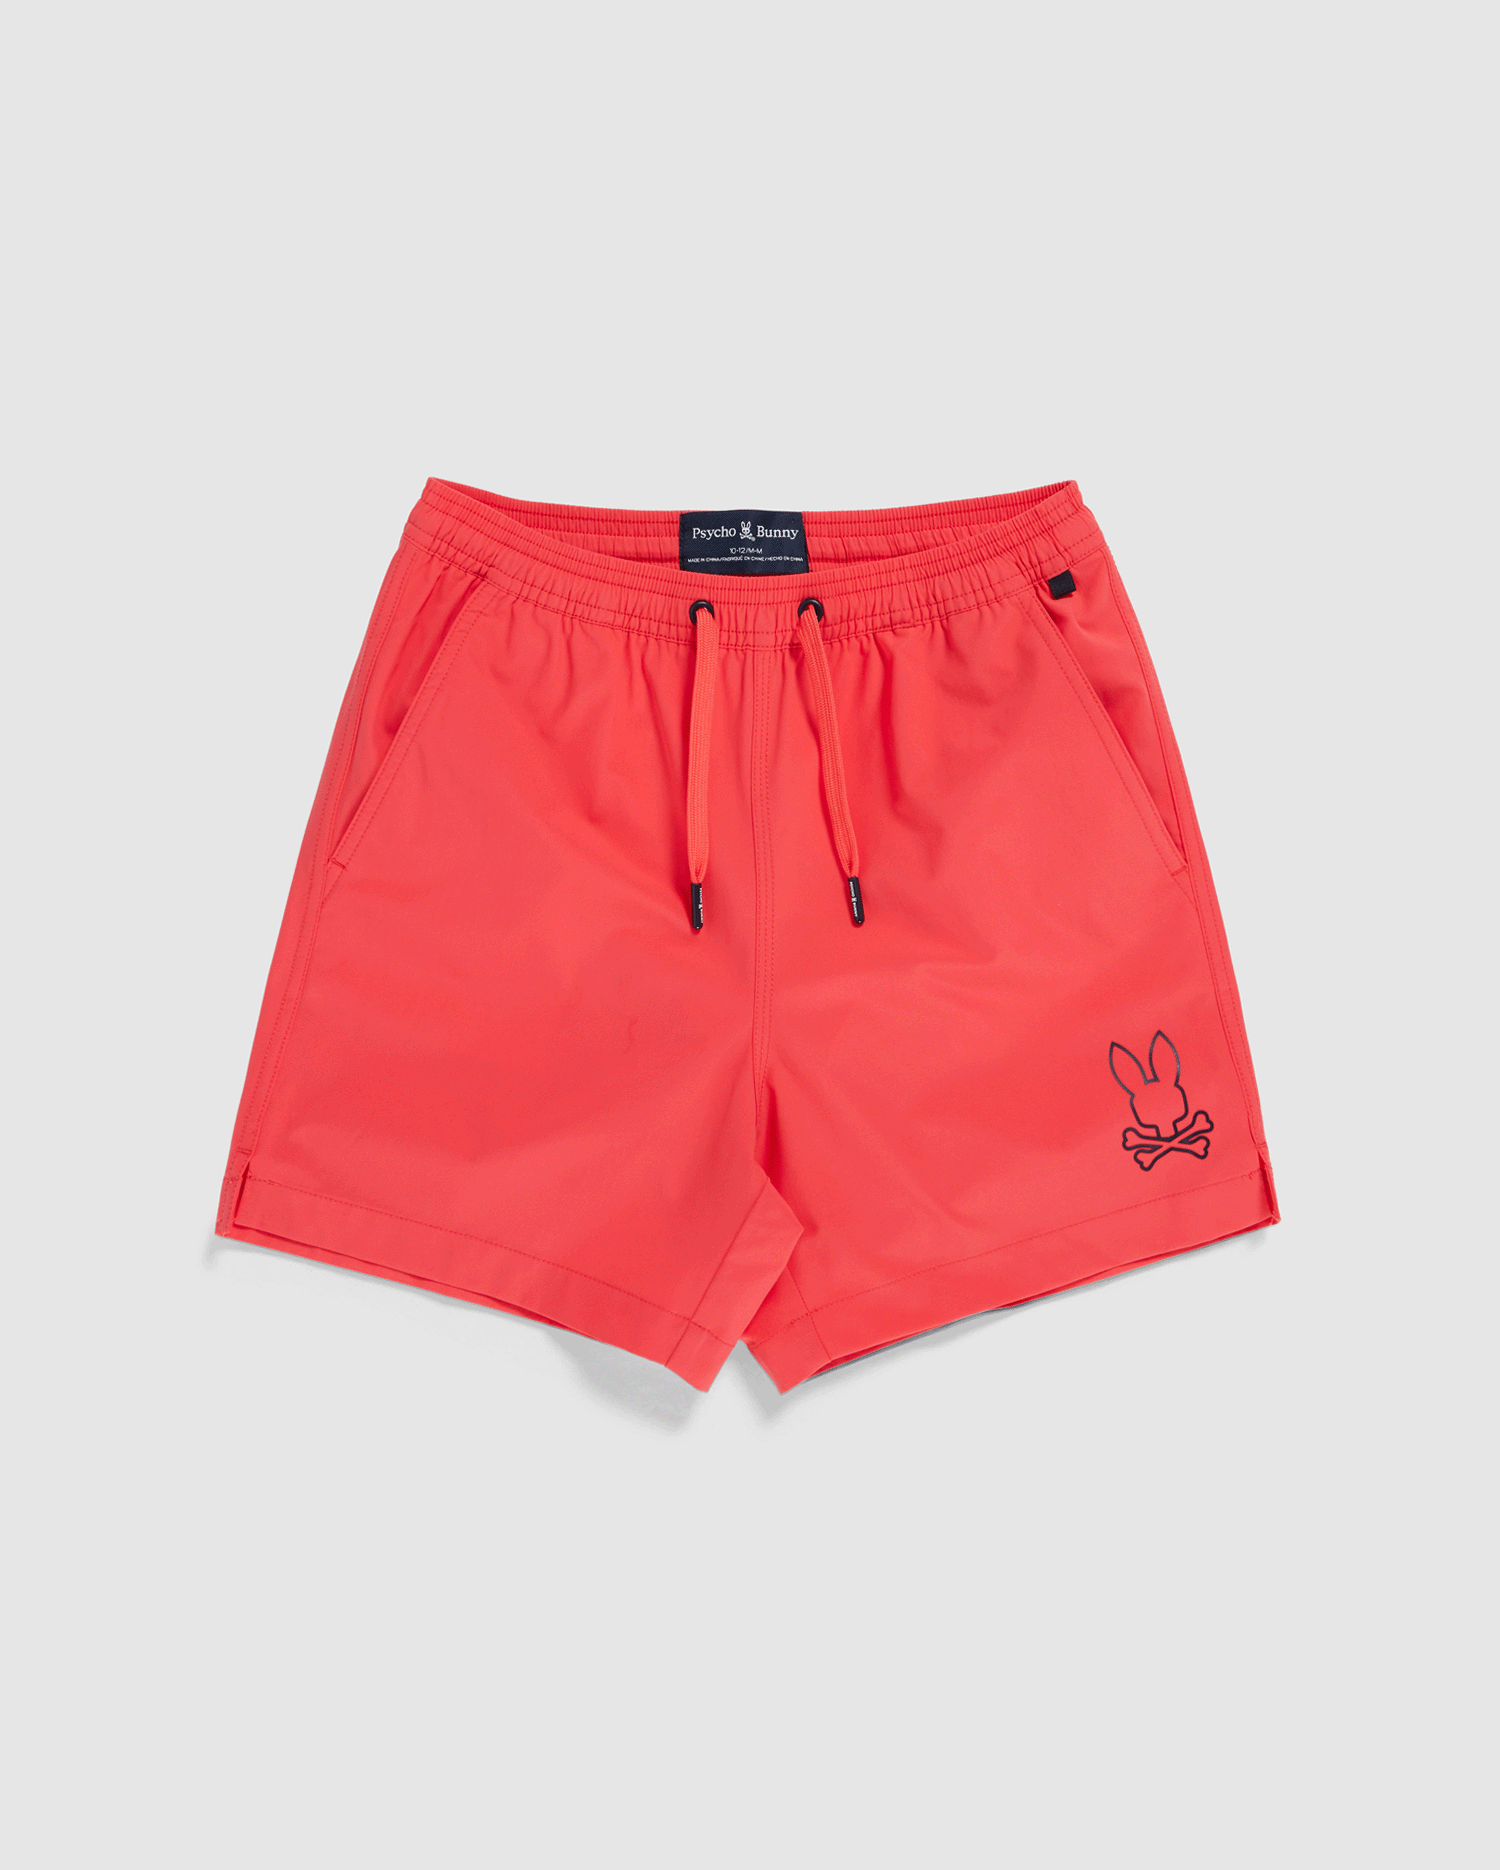 Bright red men's swim trunks featuring a black cartoon bunny with crossbones on the left leg. Made from quick-dry material, the KIDS PARKER HYDROCHROMIC SWIM TRUNK - B0W646C200 by Psycho Bunny has an elastic waistband with a drawstring, two side pockets, and a back pocket with a small black loop above it. Perfect for storing your waterproof bag.